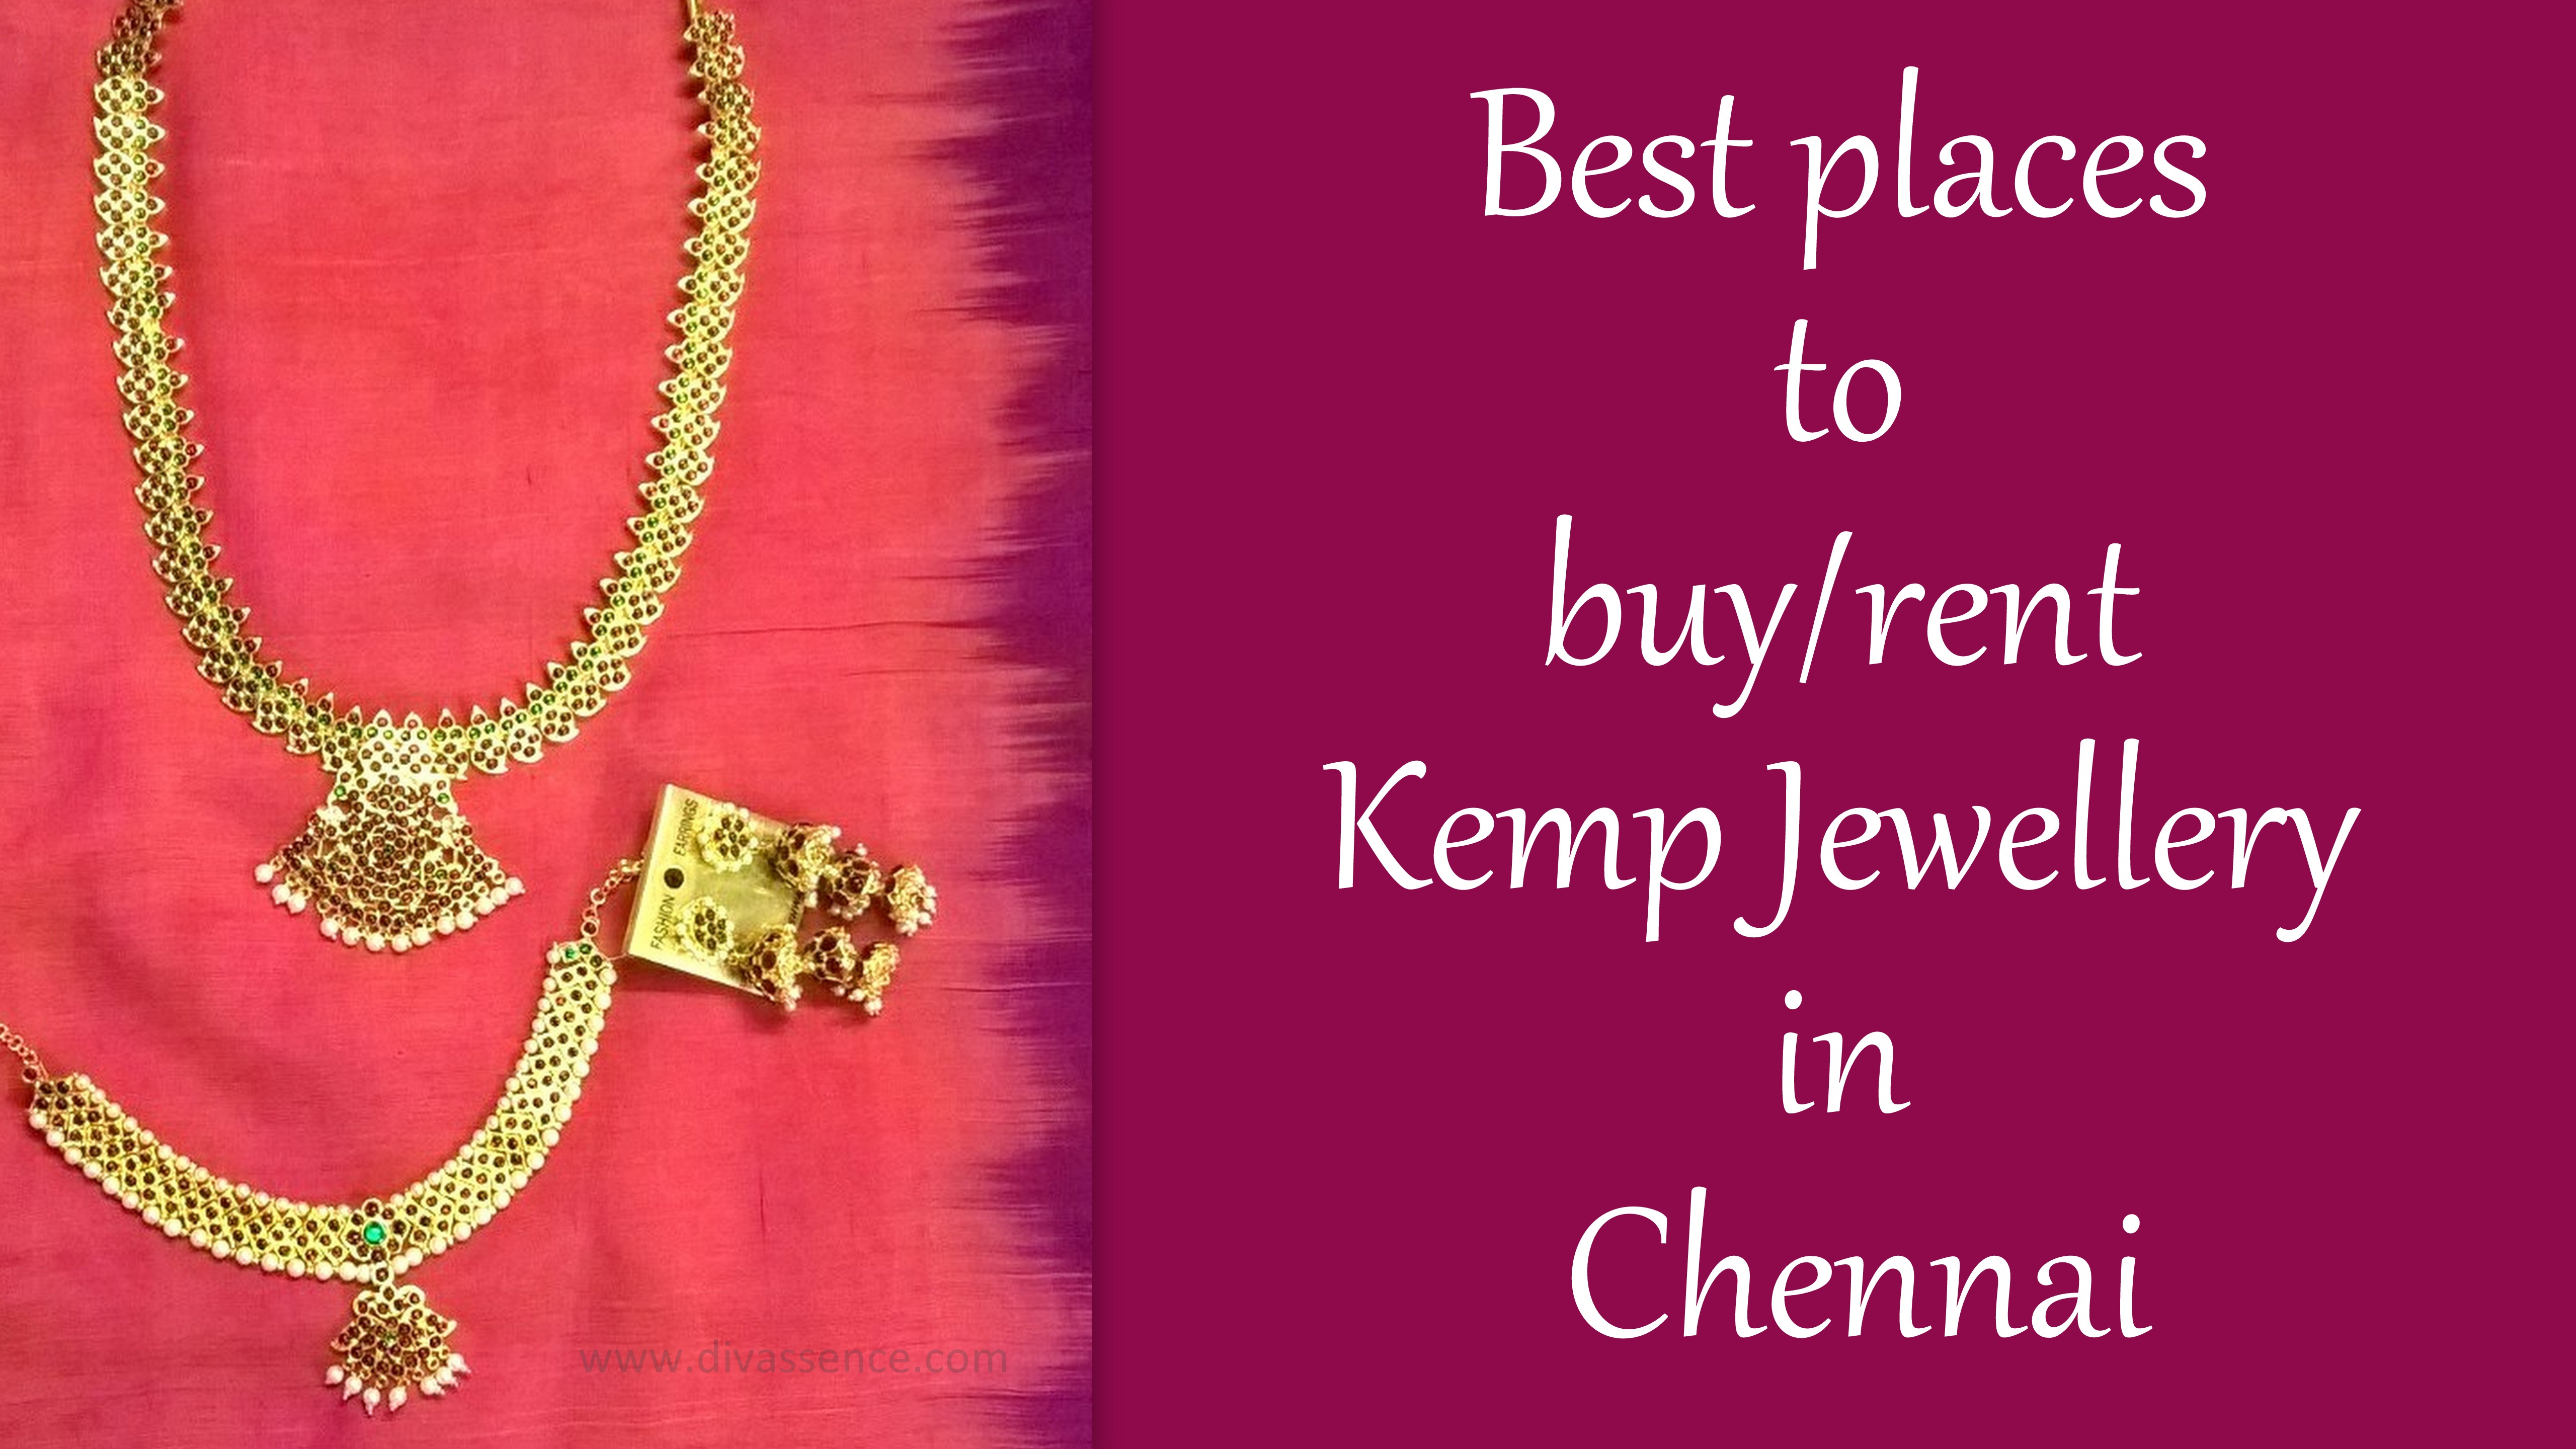 Best places to buy/rent traditional South Indian bridal jewellery